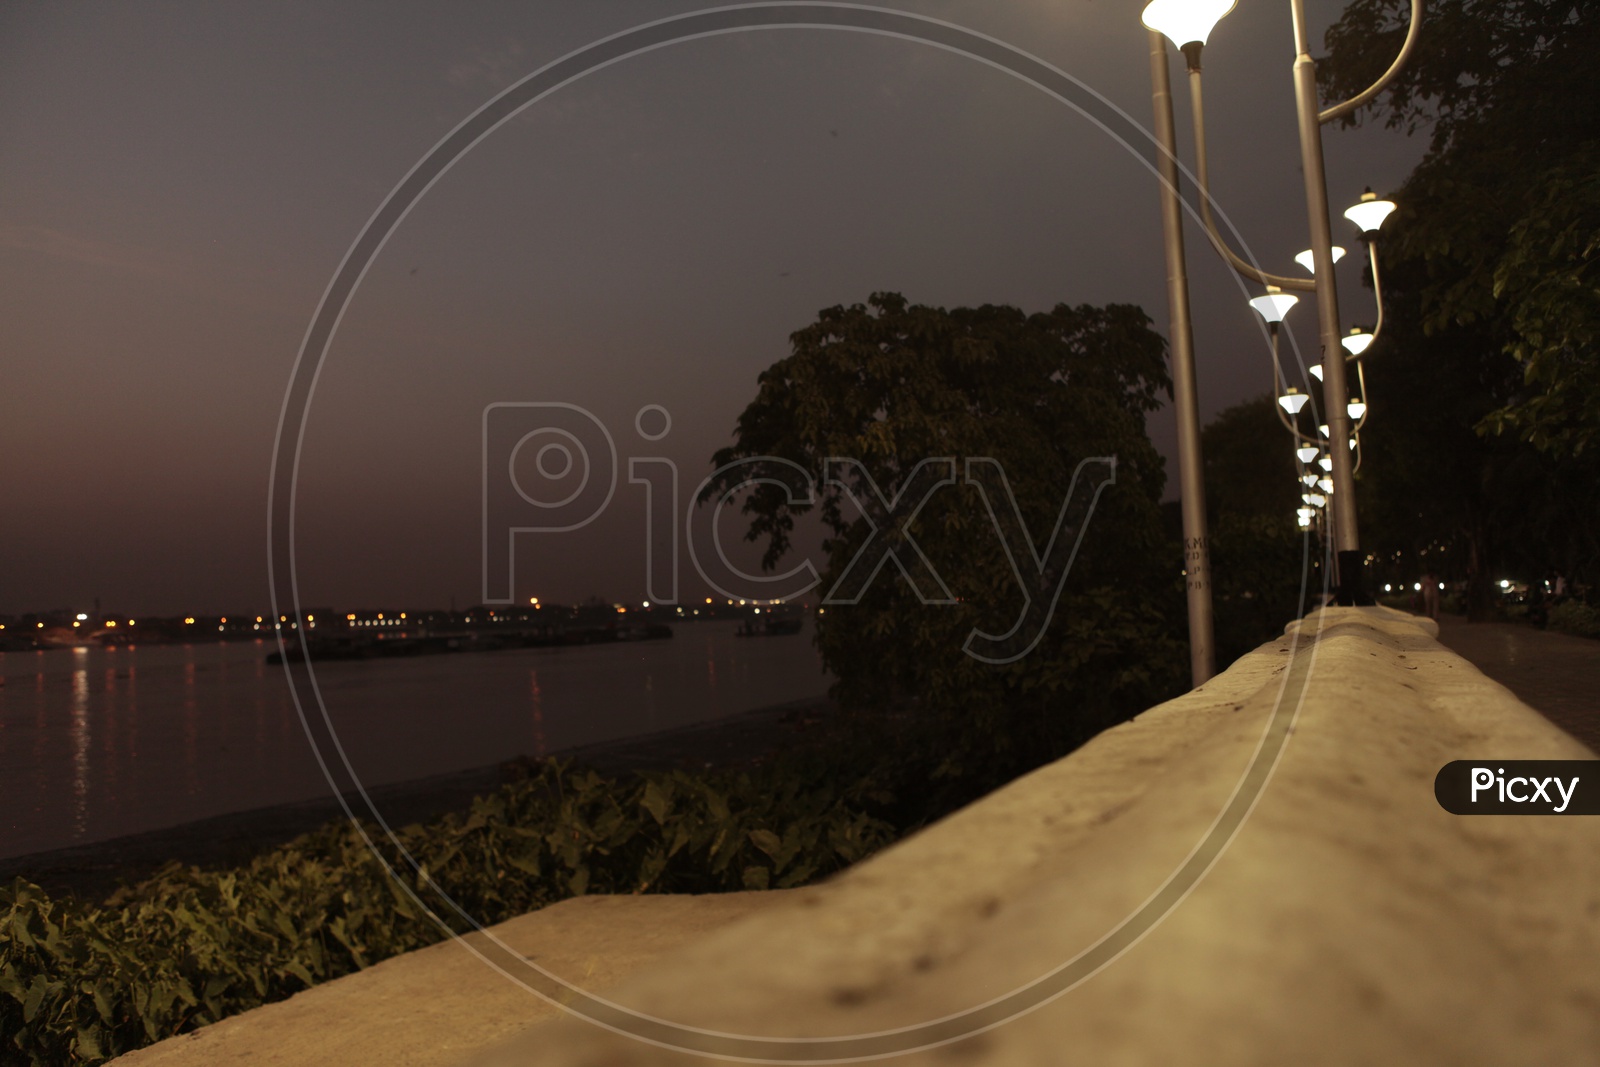 Street lights by the Hooghly river